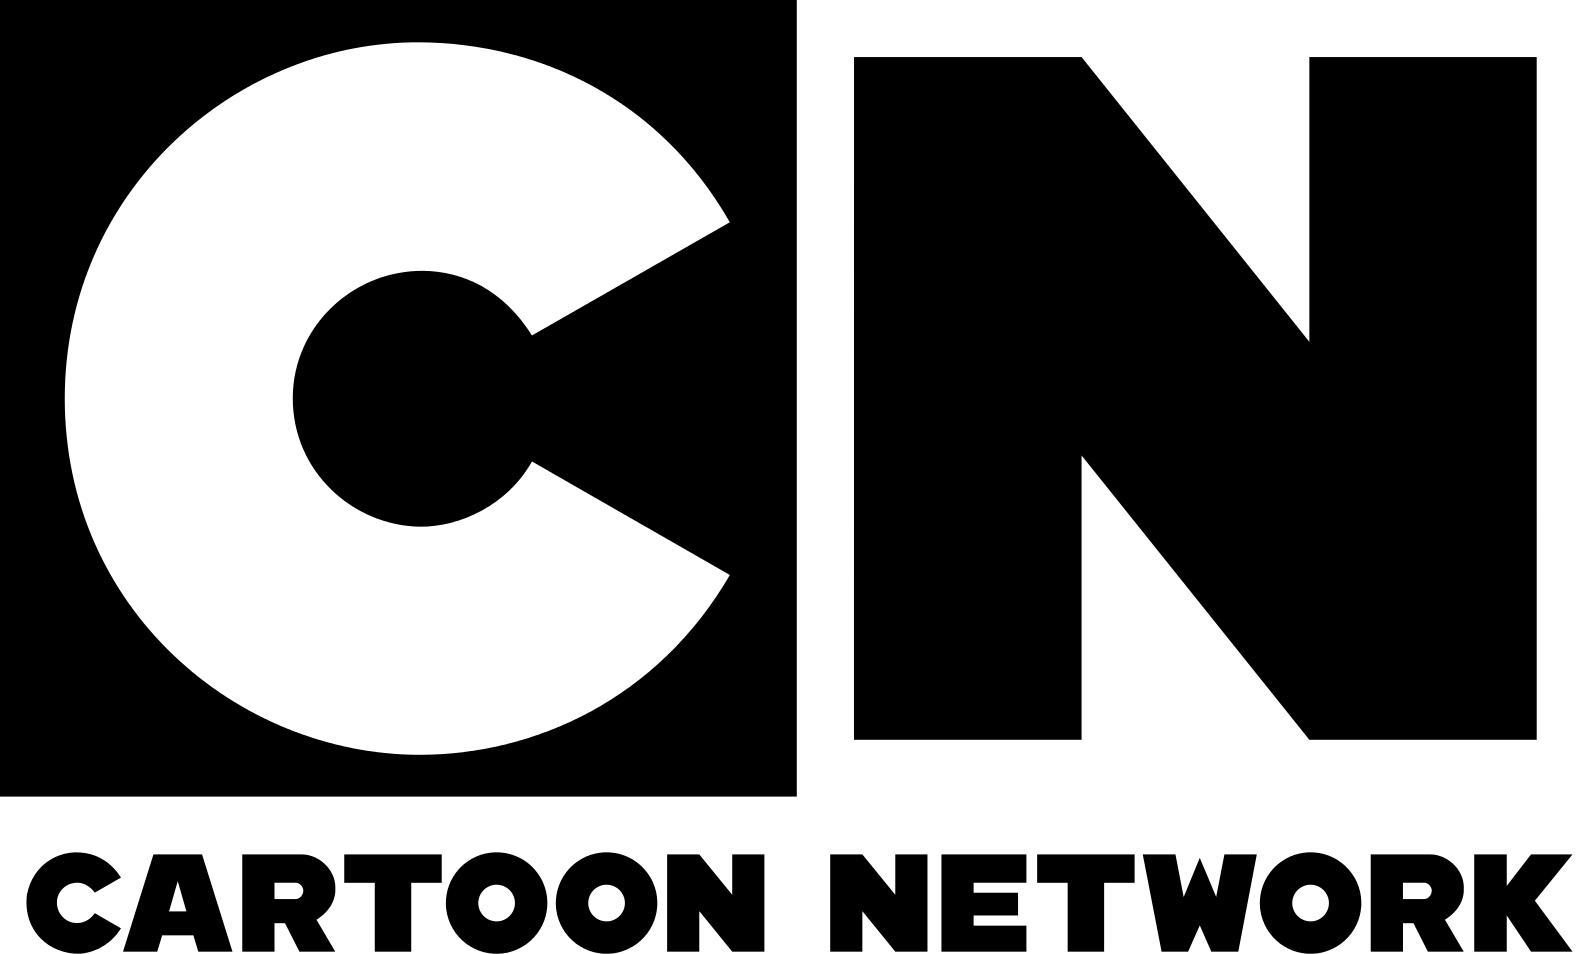 What does the Cartoon Network and Warner Bros. merger mean?